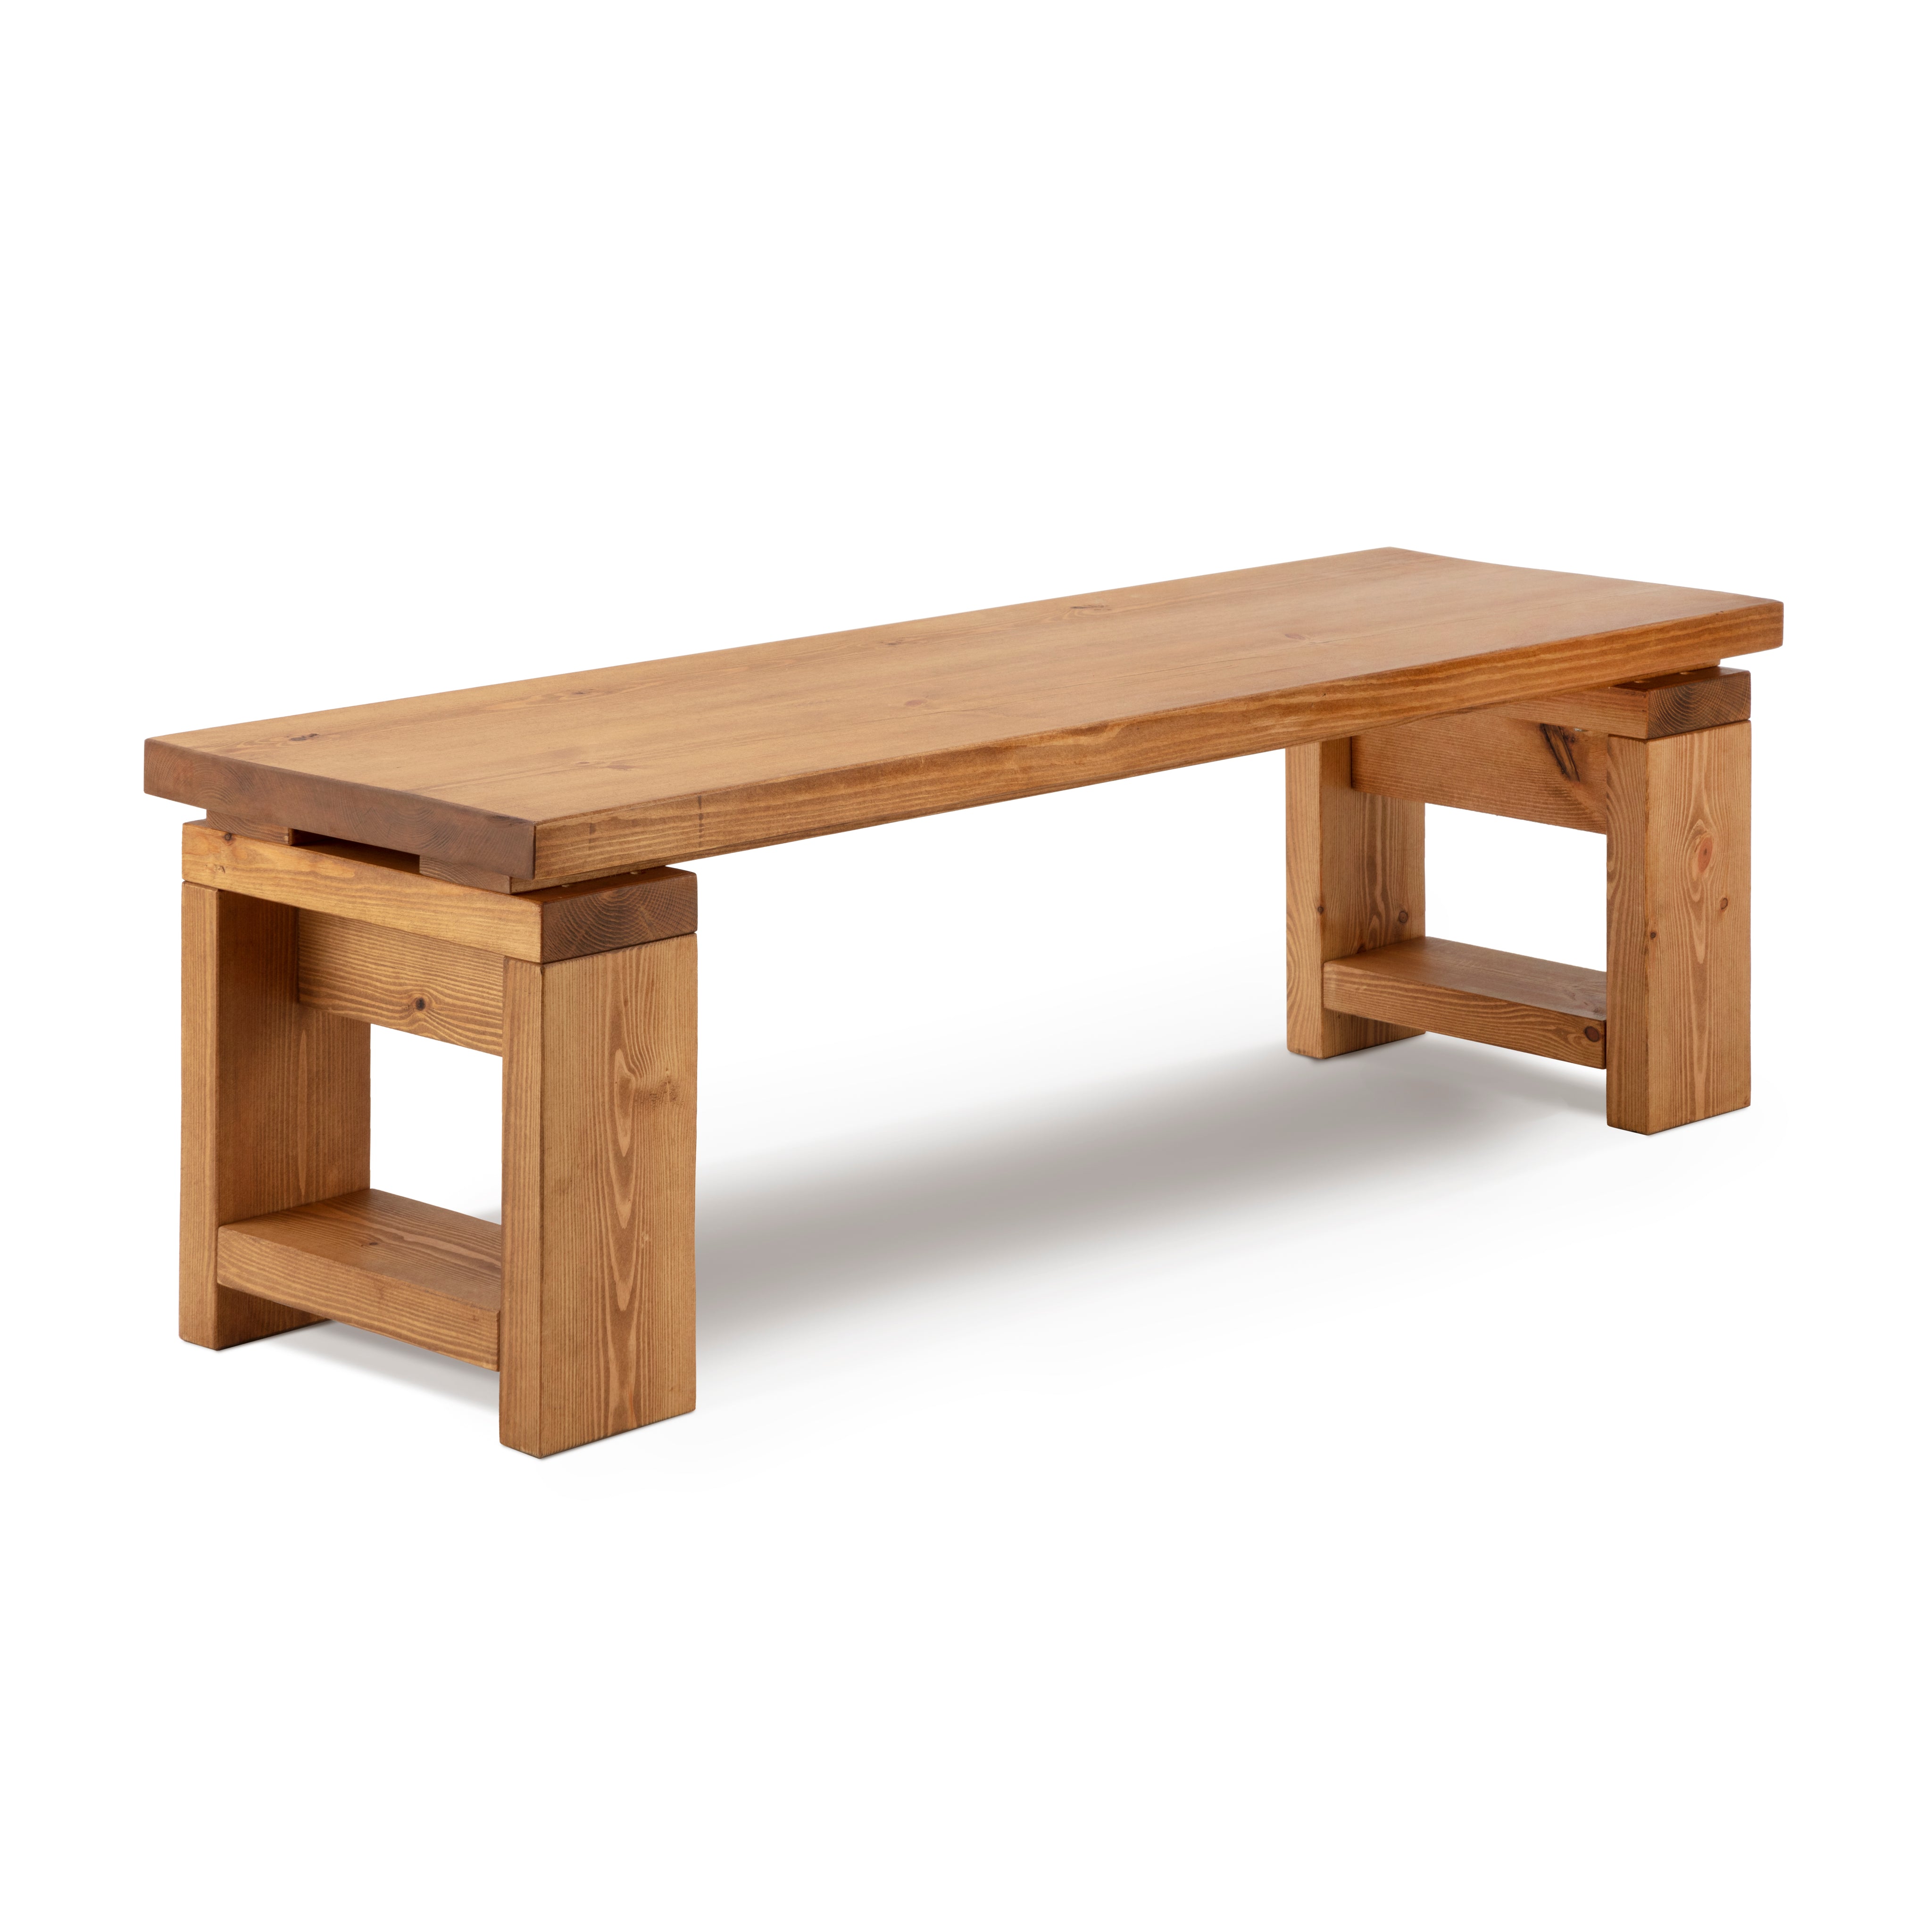 Sandyford Dining Table And Benches